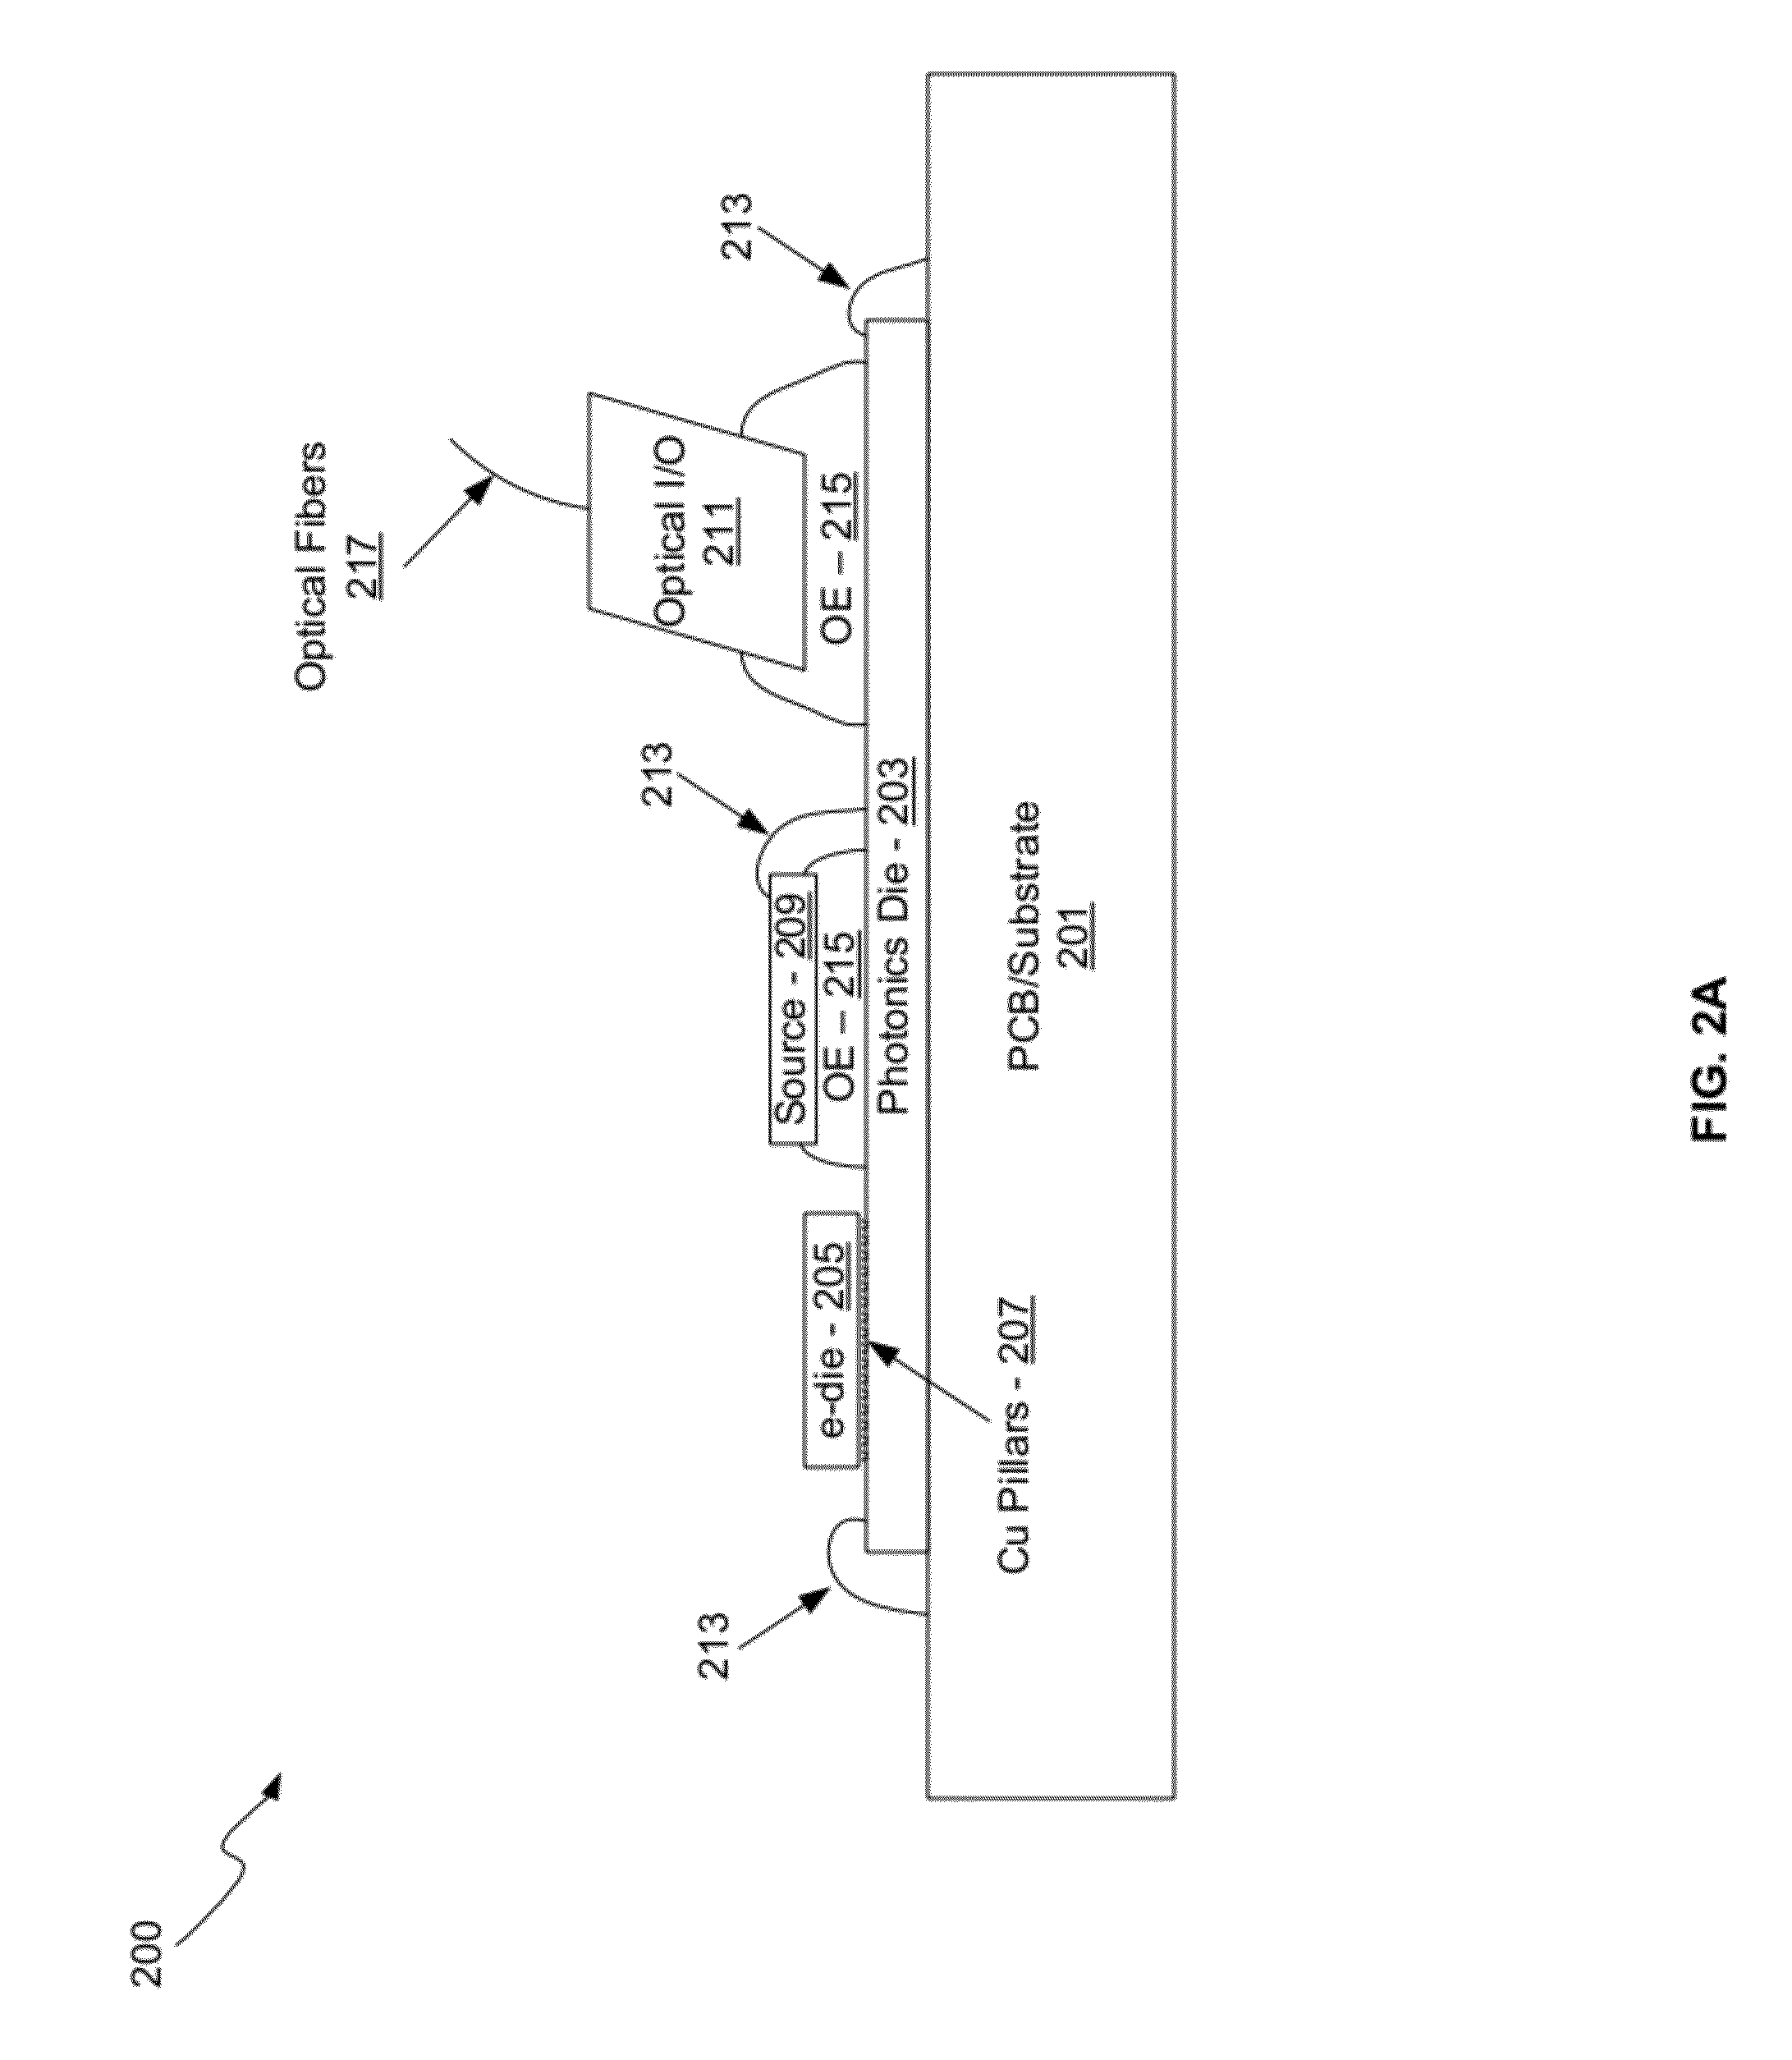 Method And System For Hybrid Integration Of Optical Communication Systems